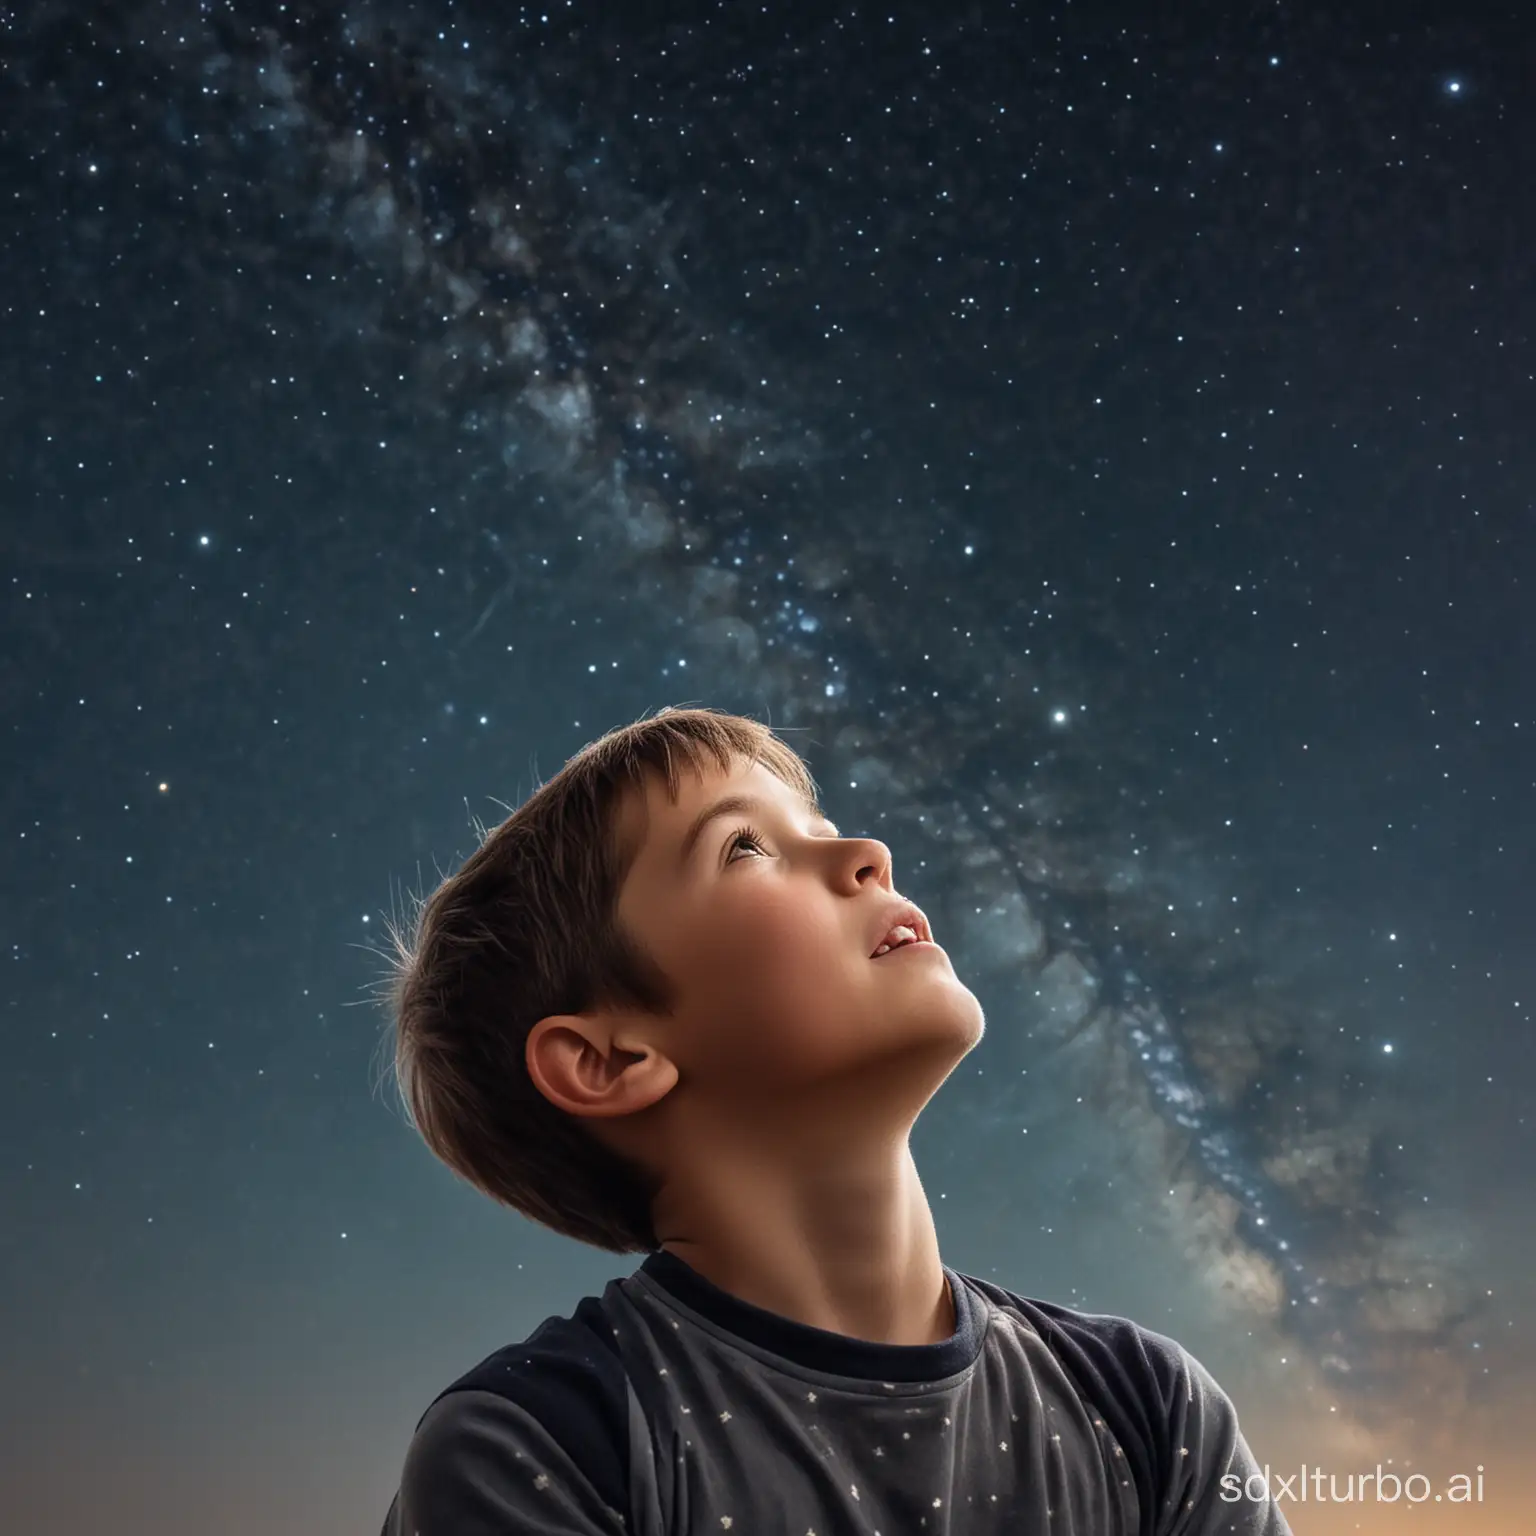 Curious-Child-Gazing-at-the-Starry-Night-Sky